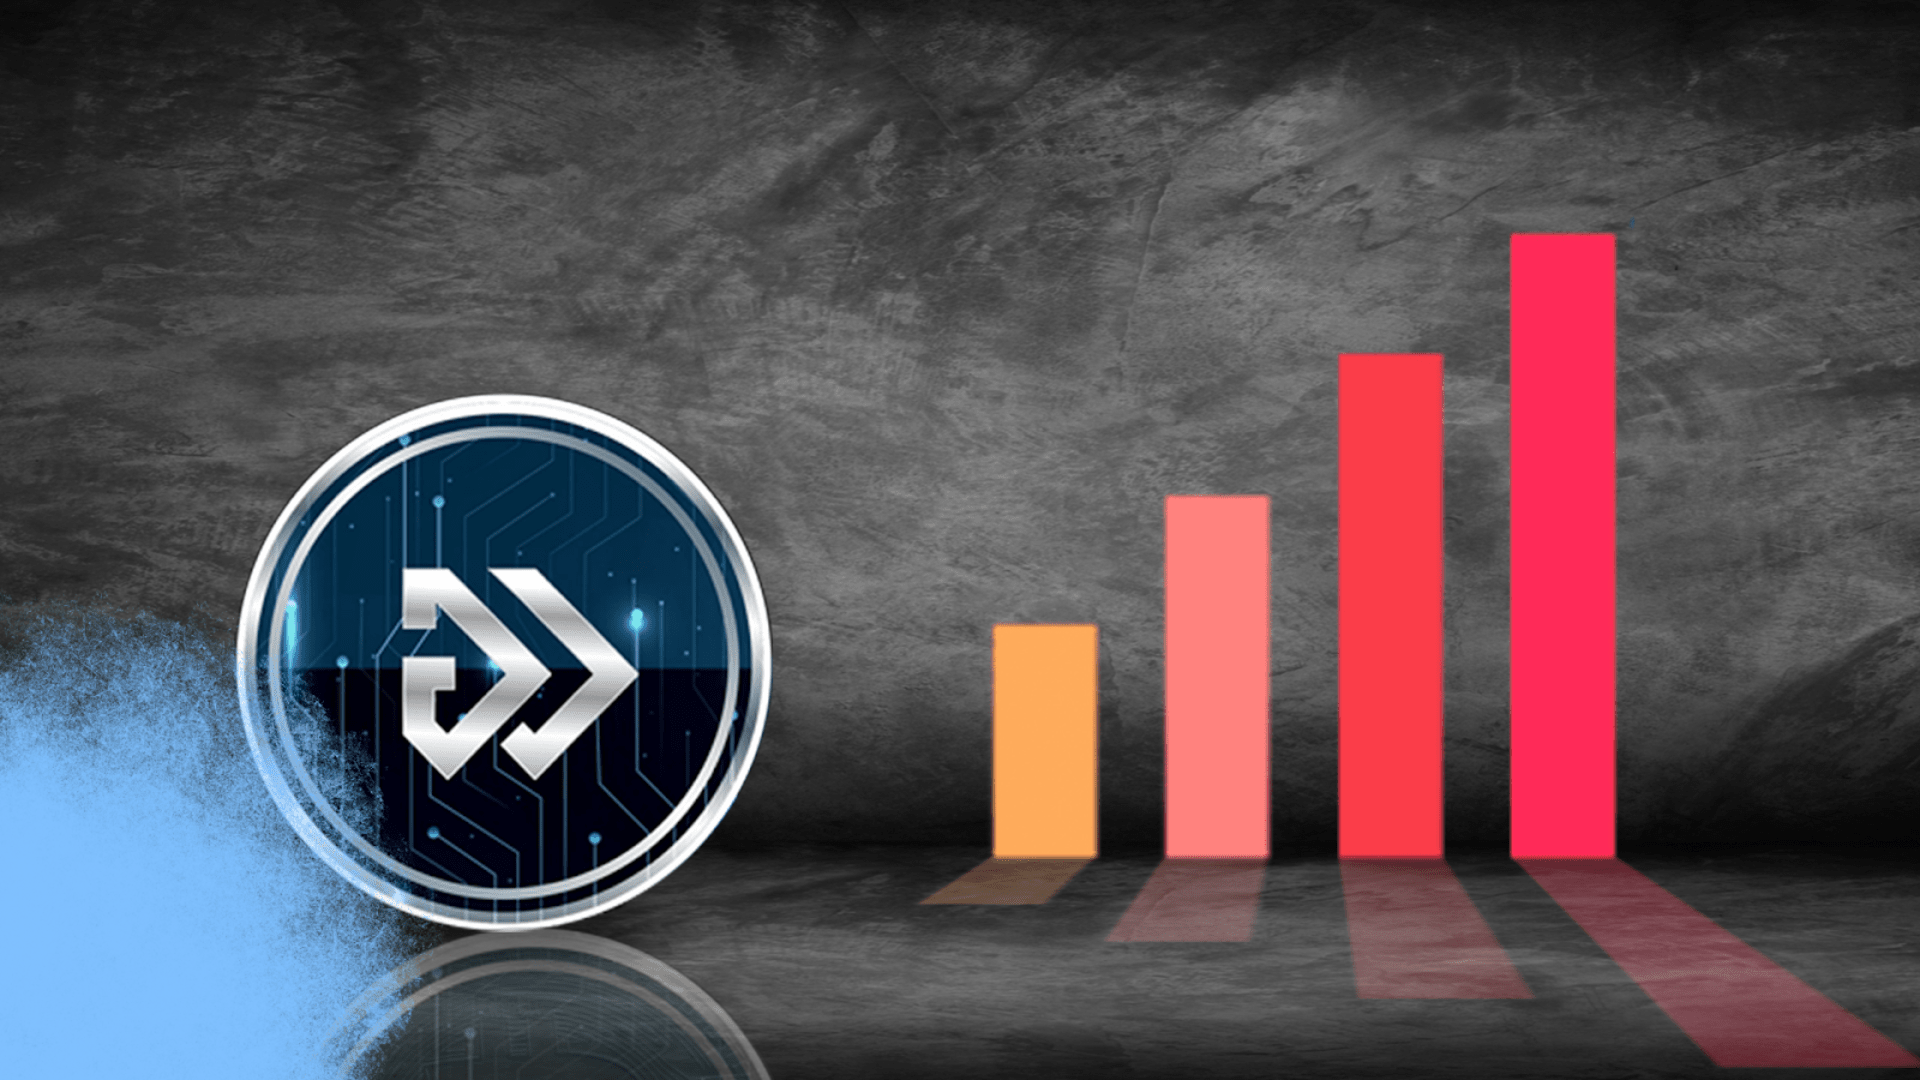 Polygon Falls Shorts Amidst Team Layoff; Algotech Emerges as a Prospective 10x Play